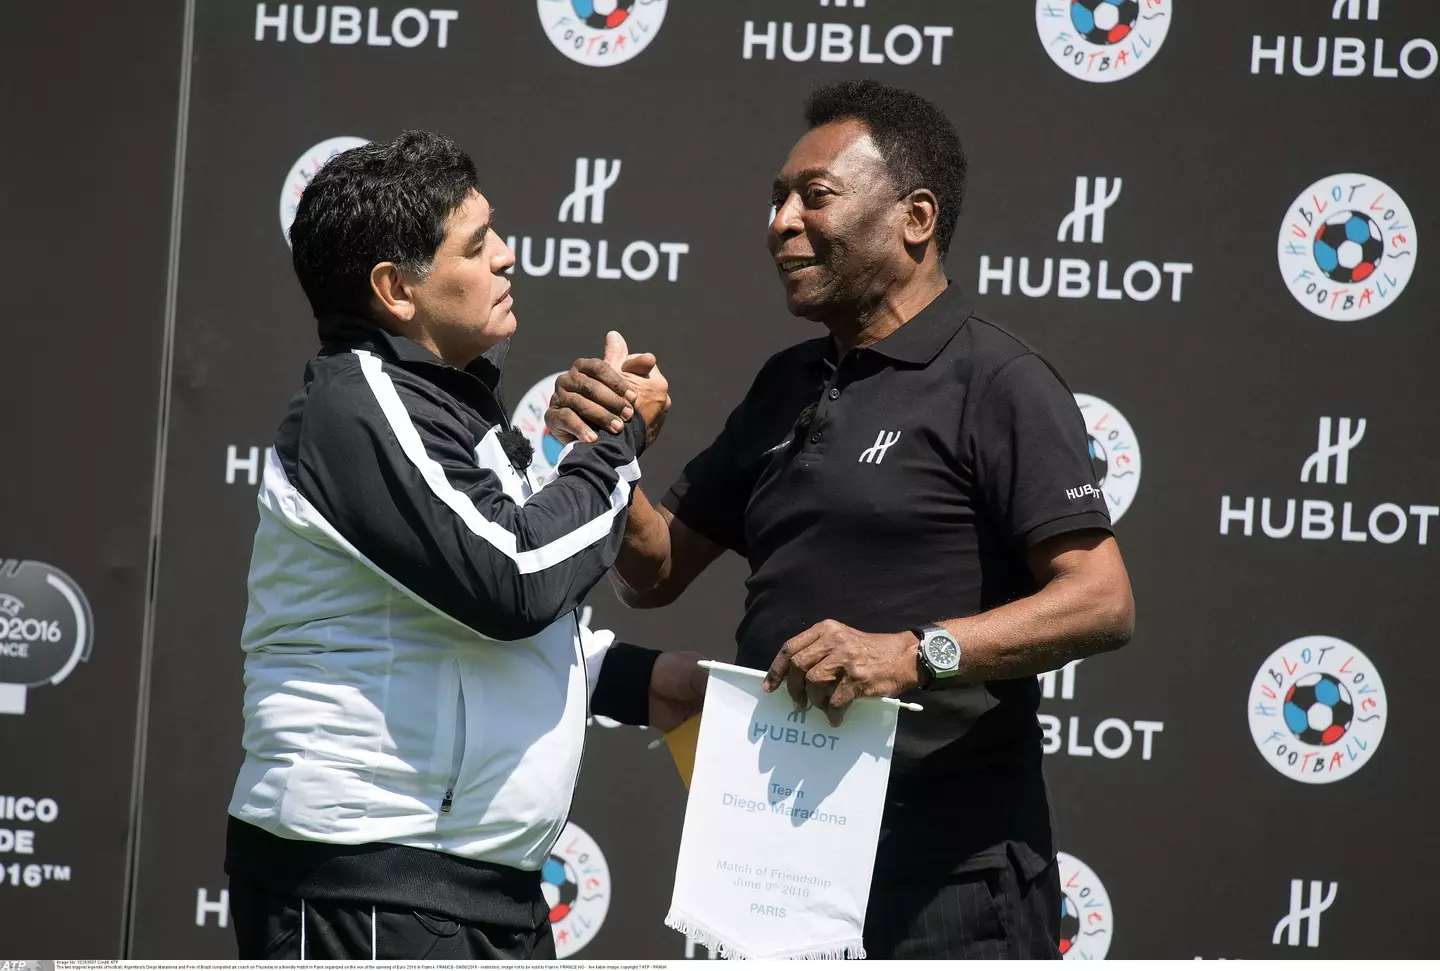 Maradona and Pele share the stage in 2016. Image: Alamy